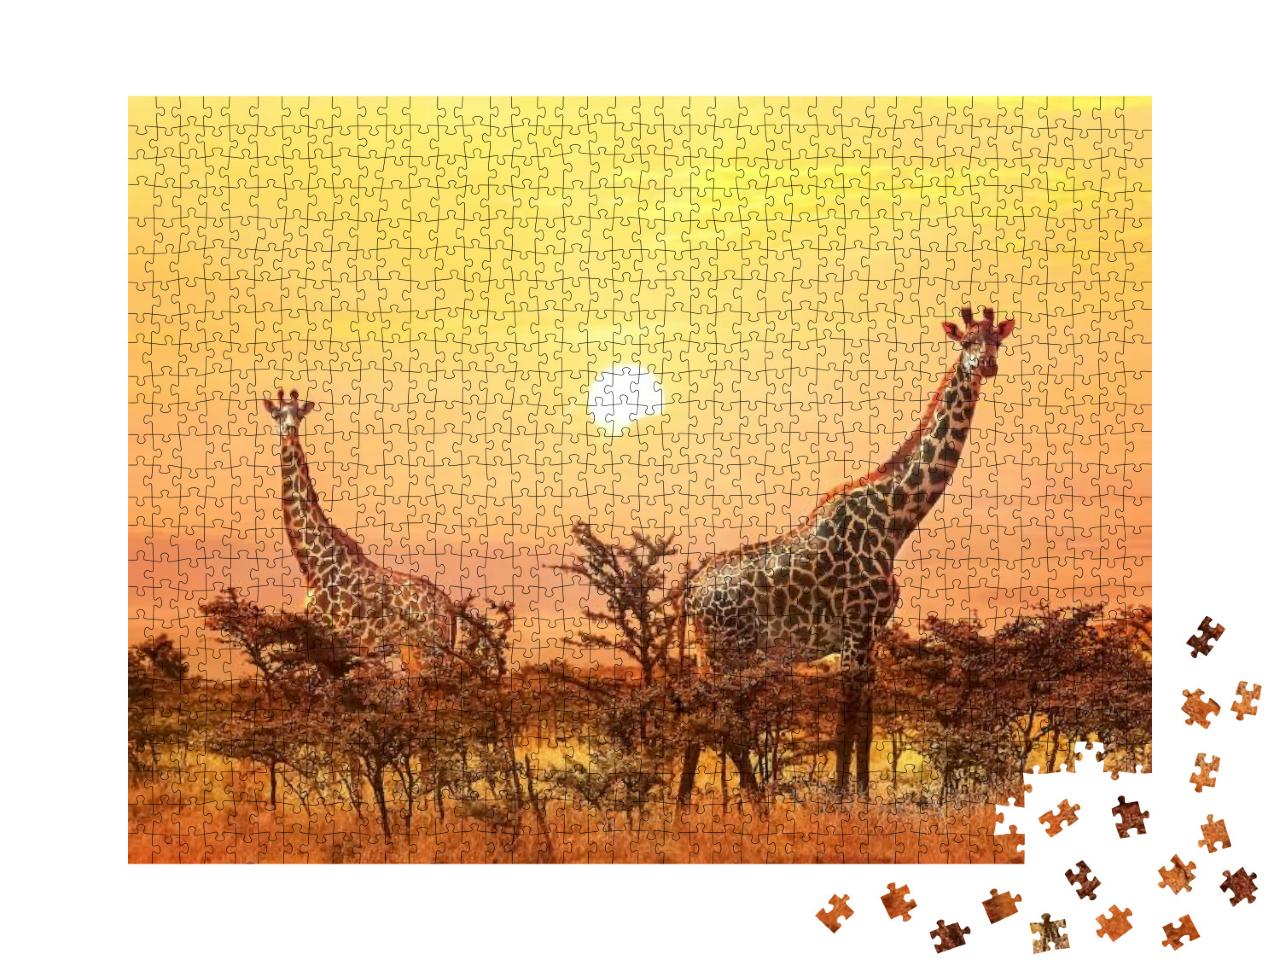 Group of Giraffes on Sunset Background... Jigsaw Puzzle with 1000 pieces